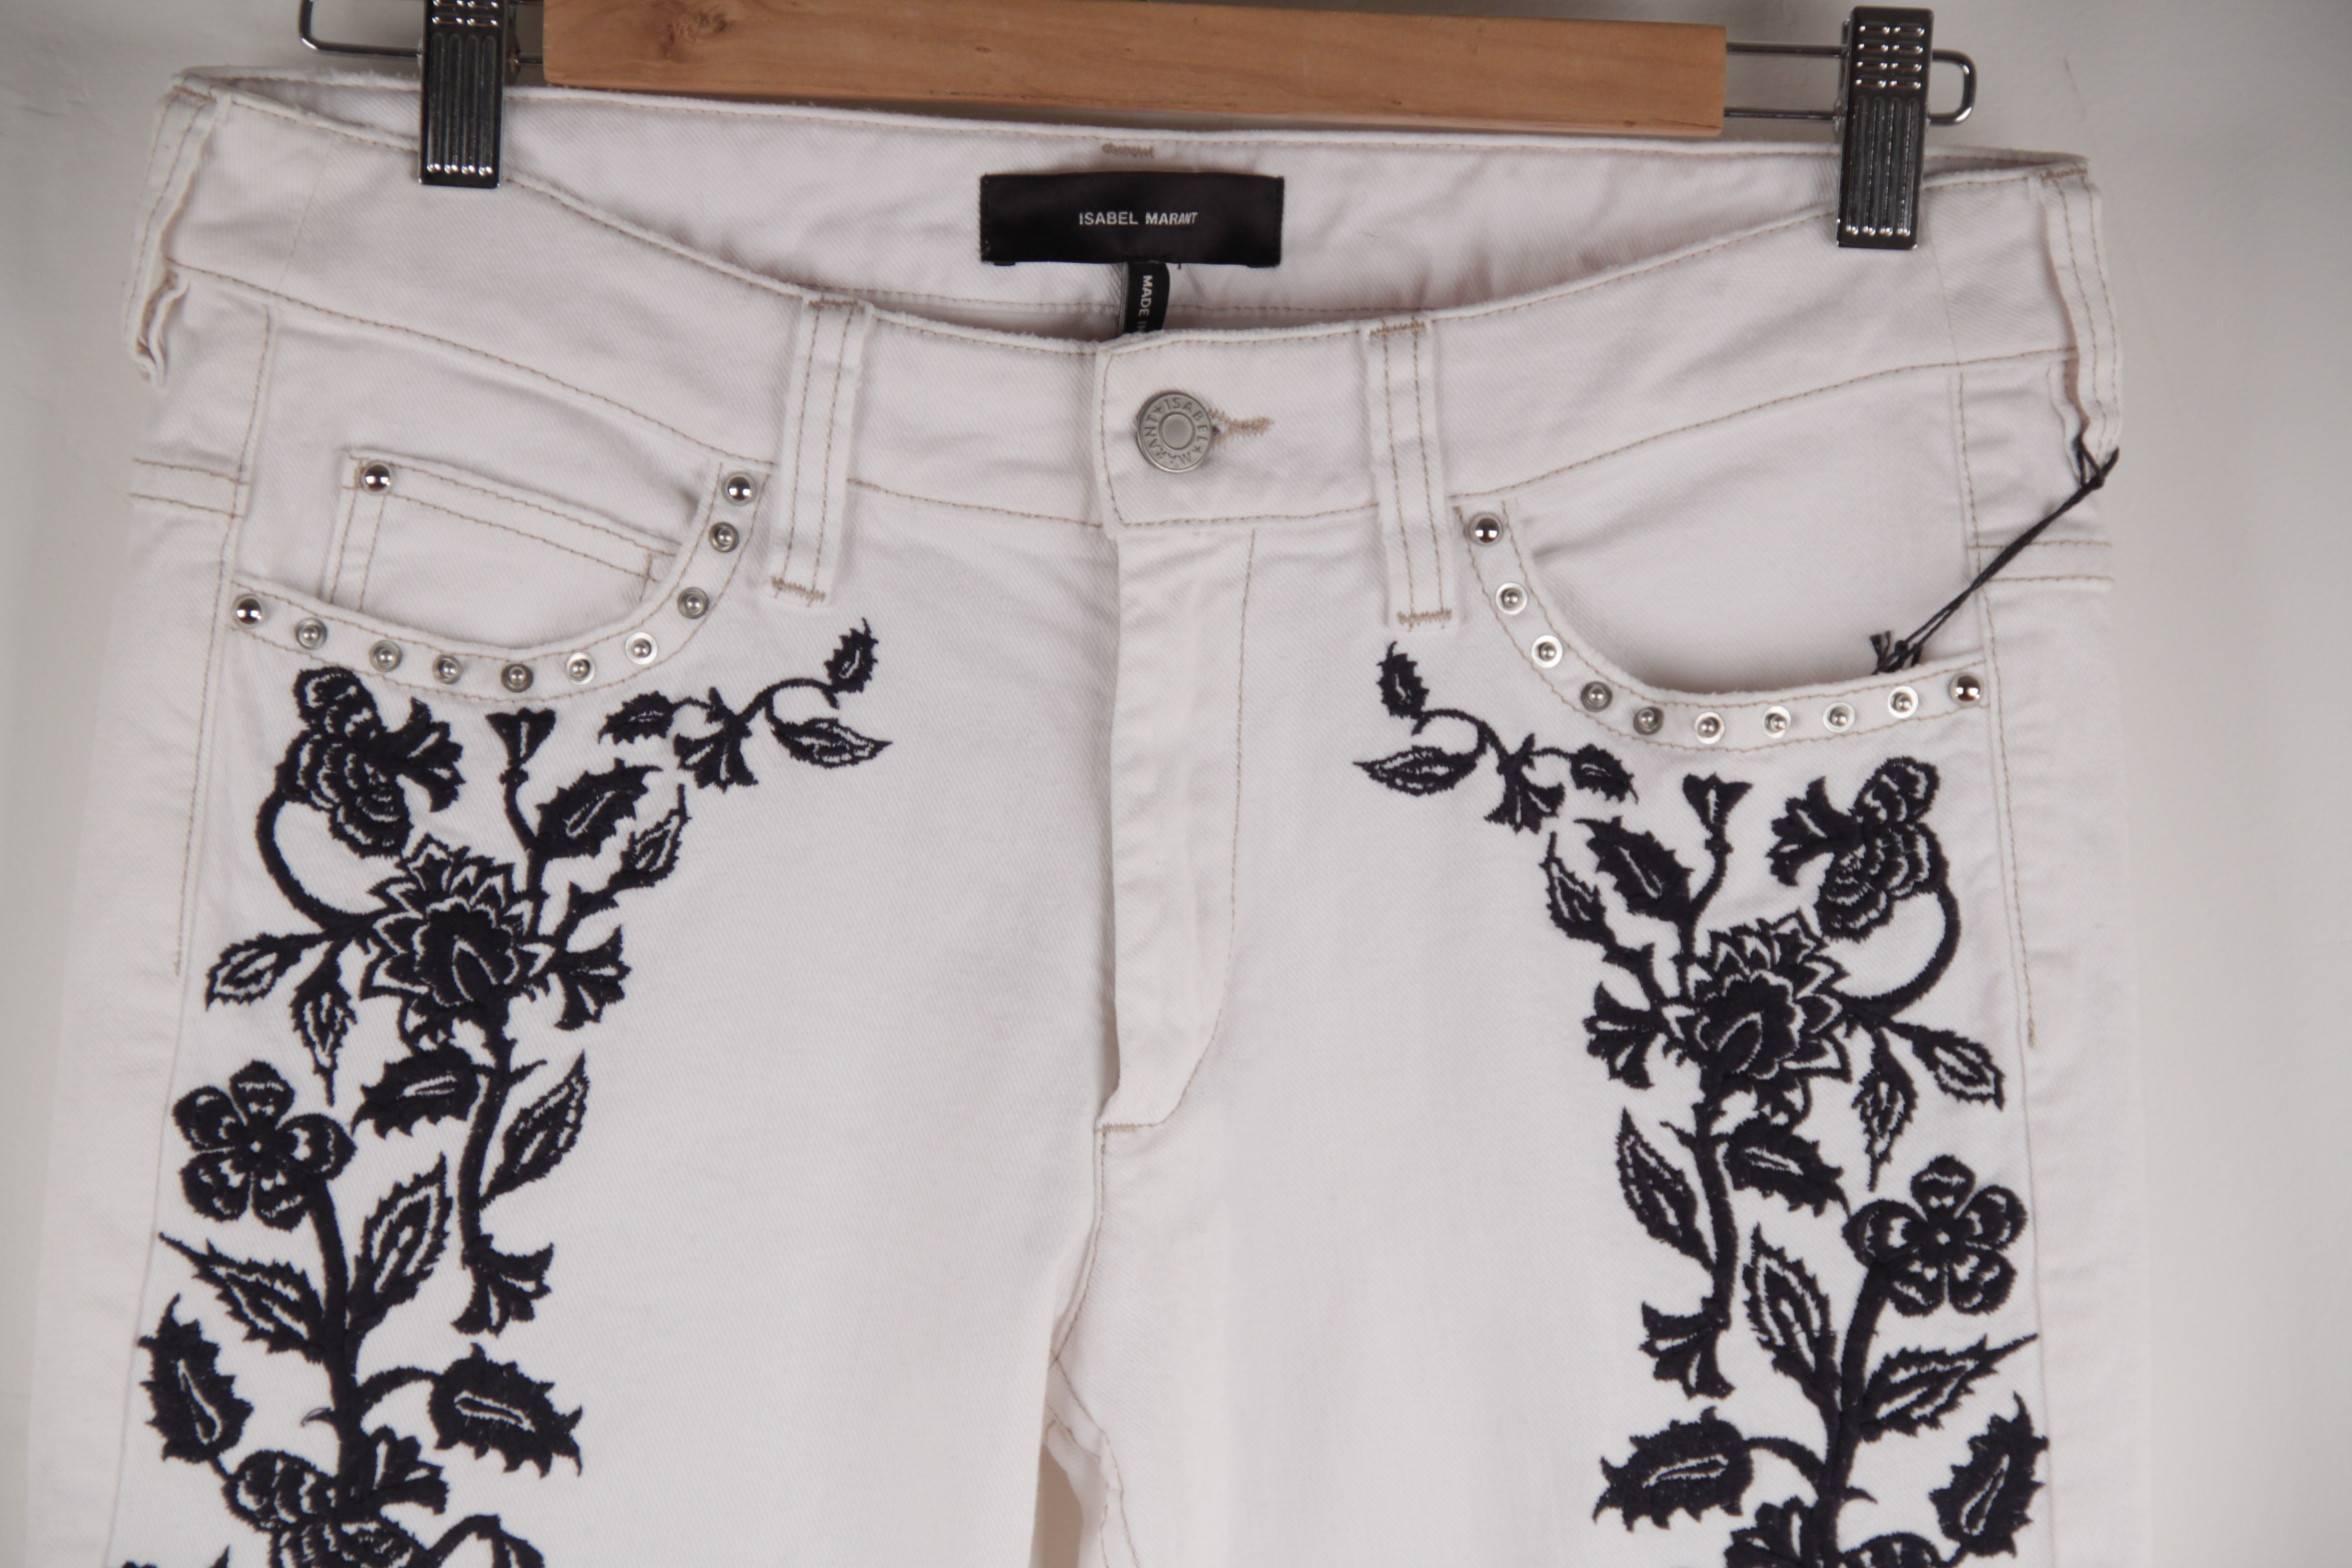 isabel marant embroidered jeans